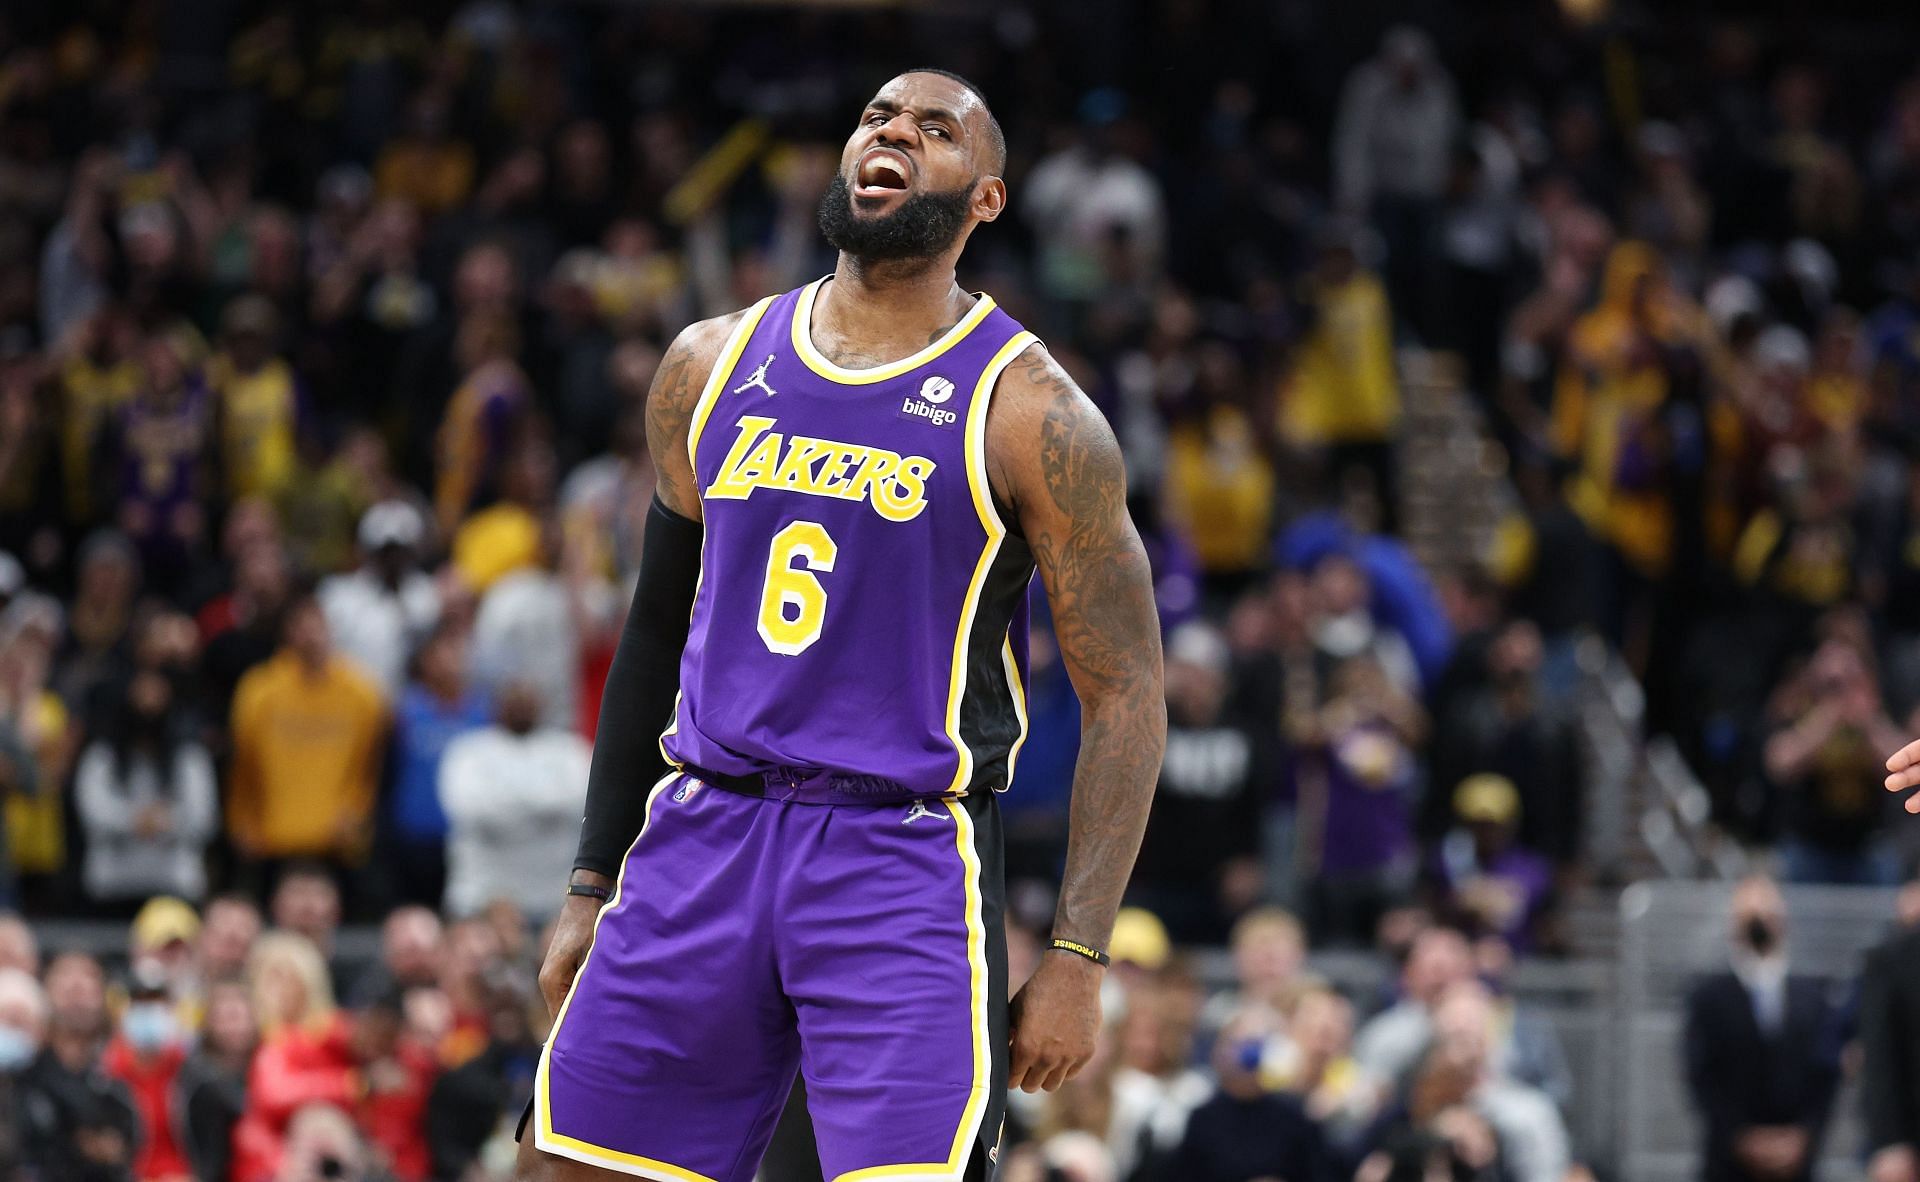 LA Lakers superstar LeBron James will be the all-time scoring king before this season ends.